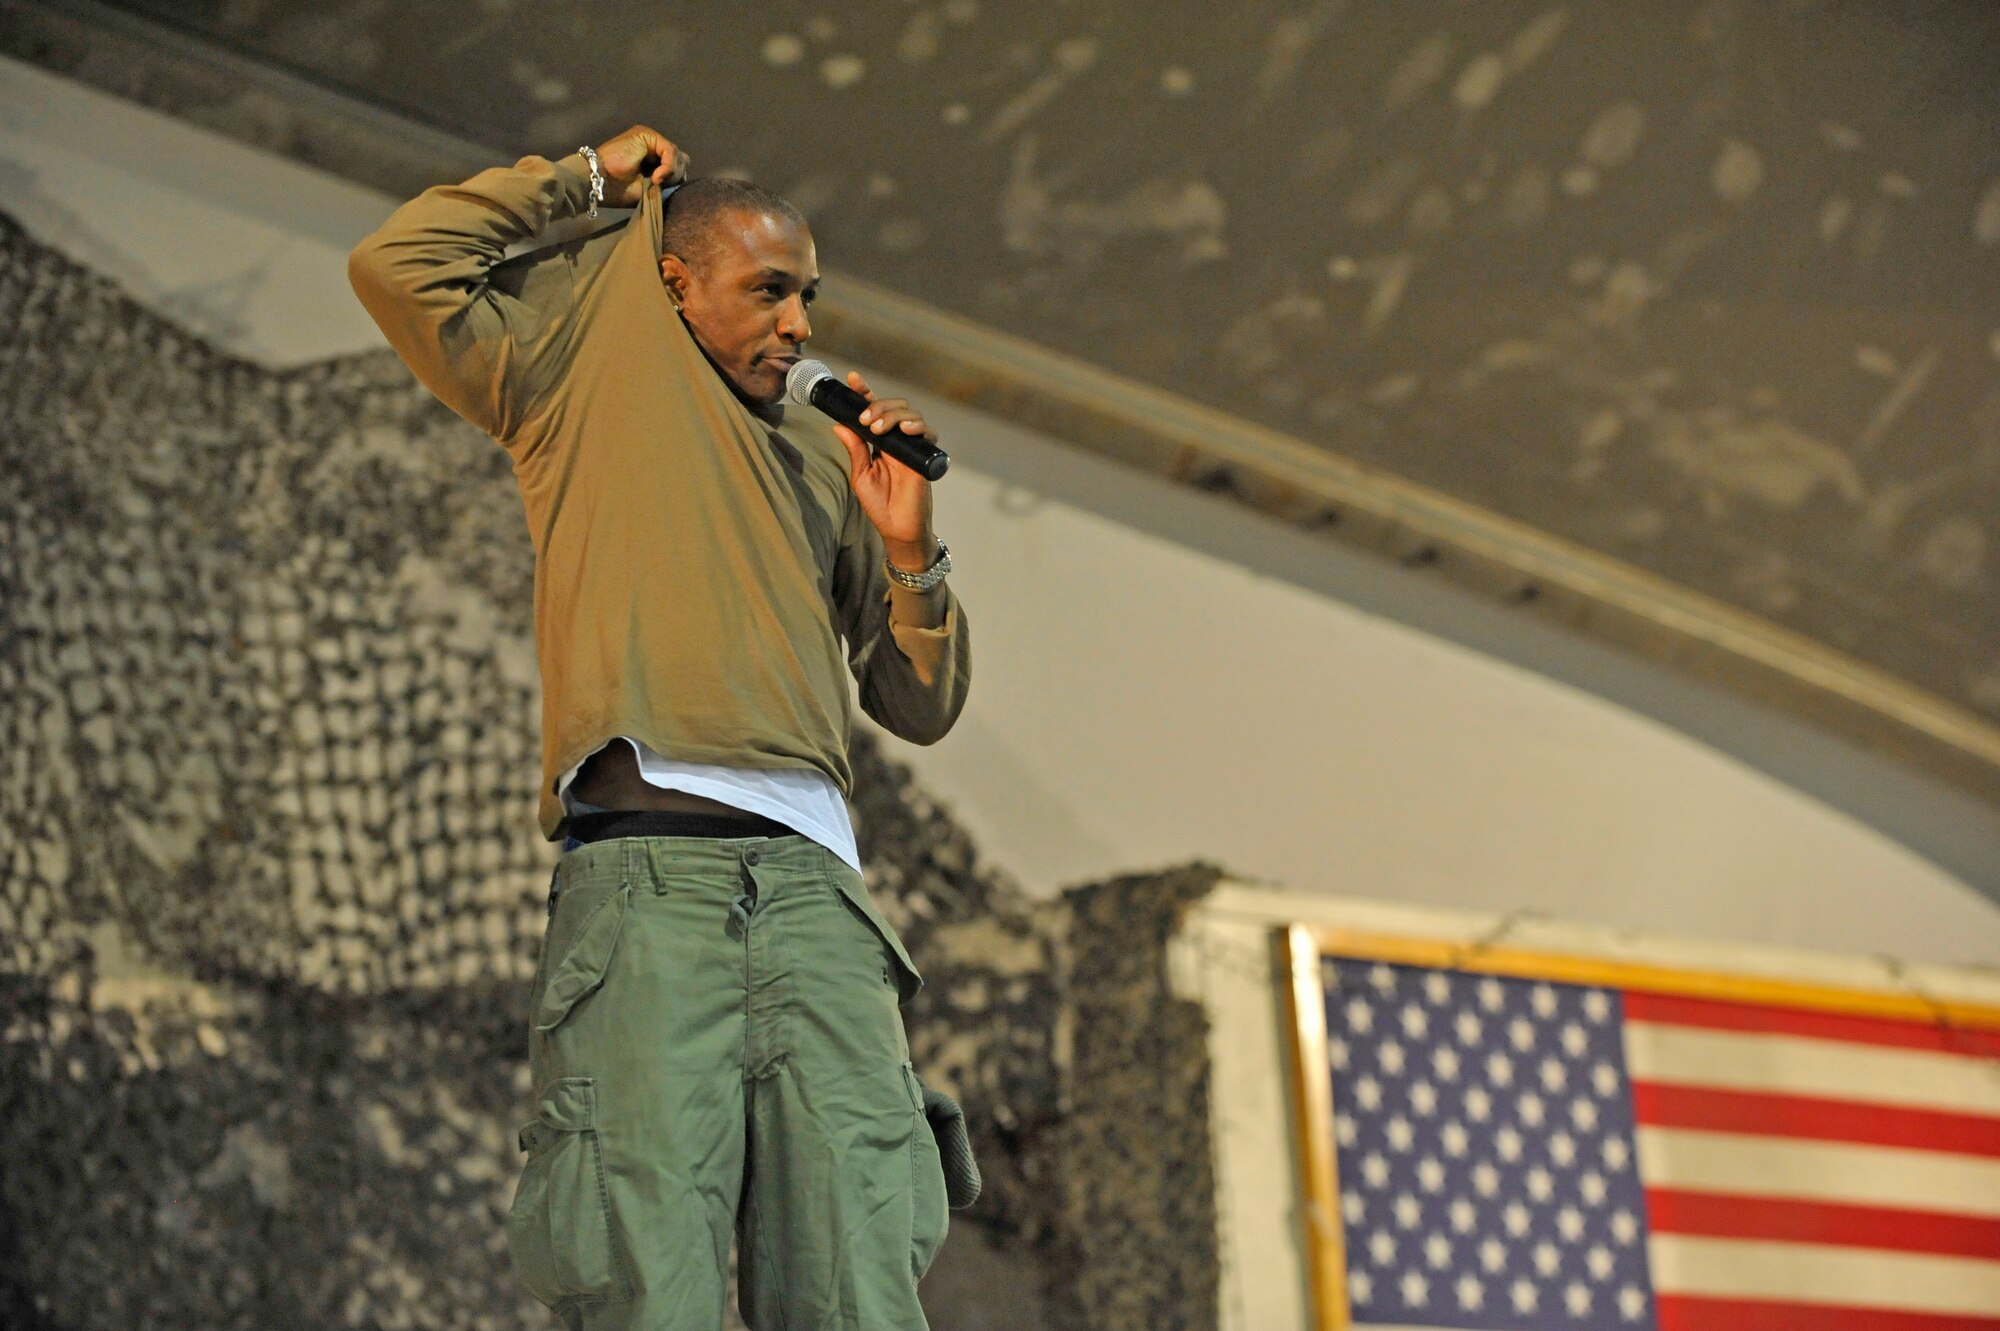 Comedian Tommy Davidson performs his comedy show for deployed Service members on New Year's Eve at Bagram Airfield, Afghanistan, Dec. 31, 2013.(U.S. Air Force photo by Senior Master Sgt. Gary J. Rihn/Released)